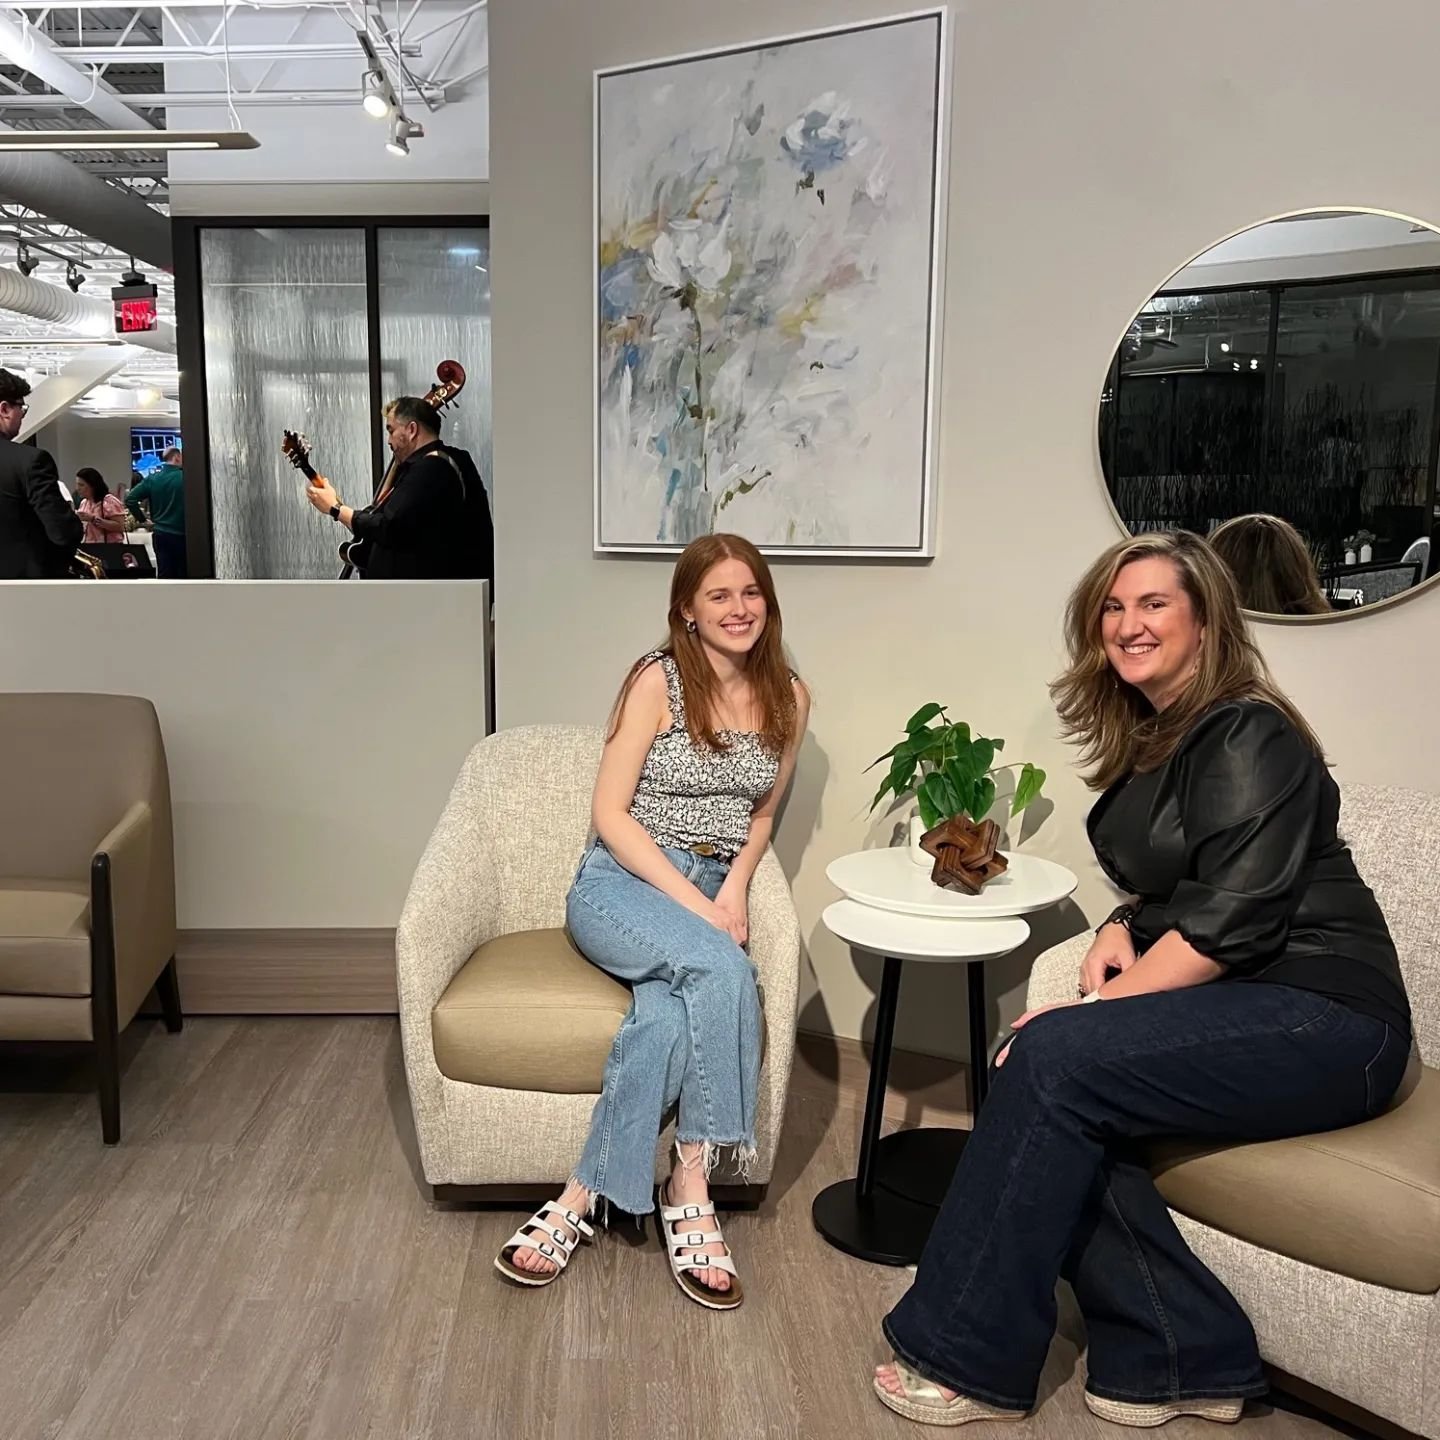 Exploring innovative senior living design at the Environments for Aging Conference + Expo, with a stop by the @kwalufurniture showroom for inspiration! Always good to hear about some of the latest best practices in senior-friendly design for long-ter